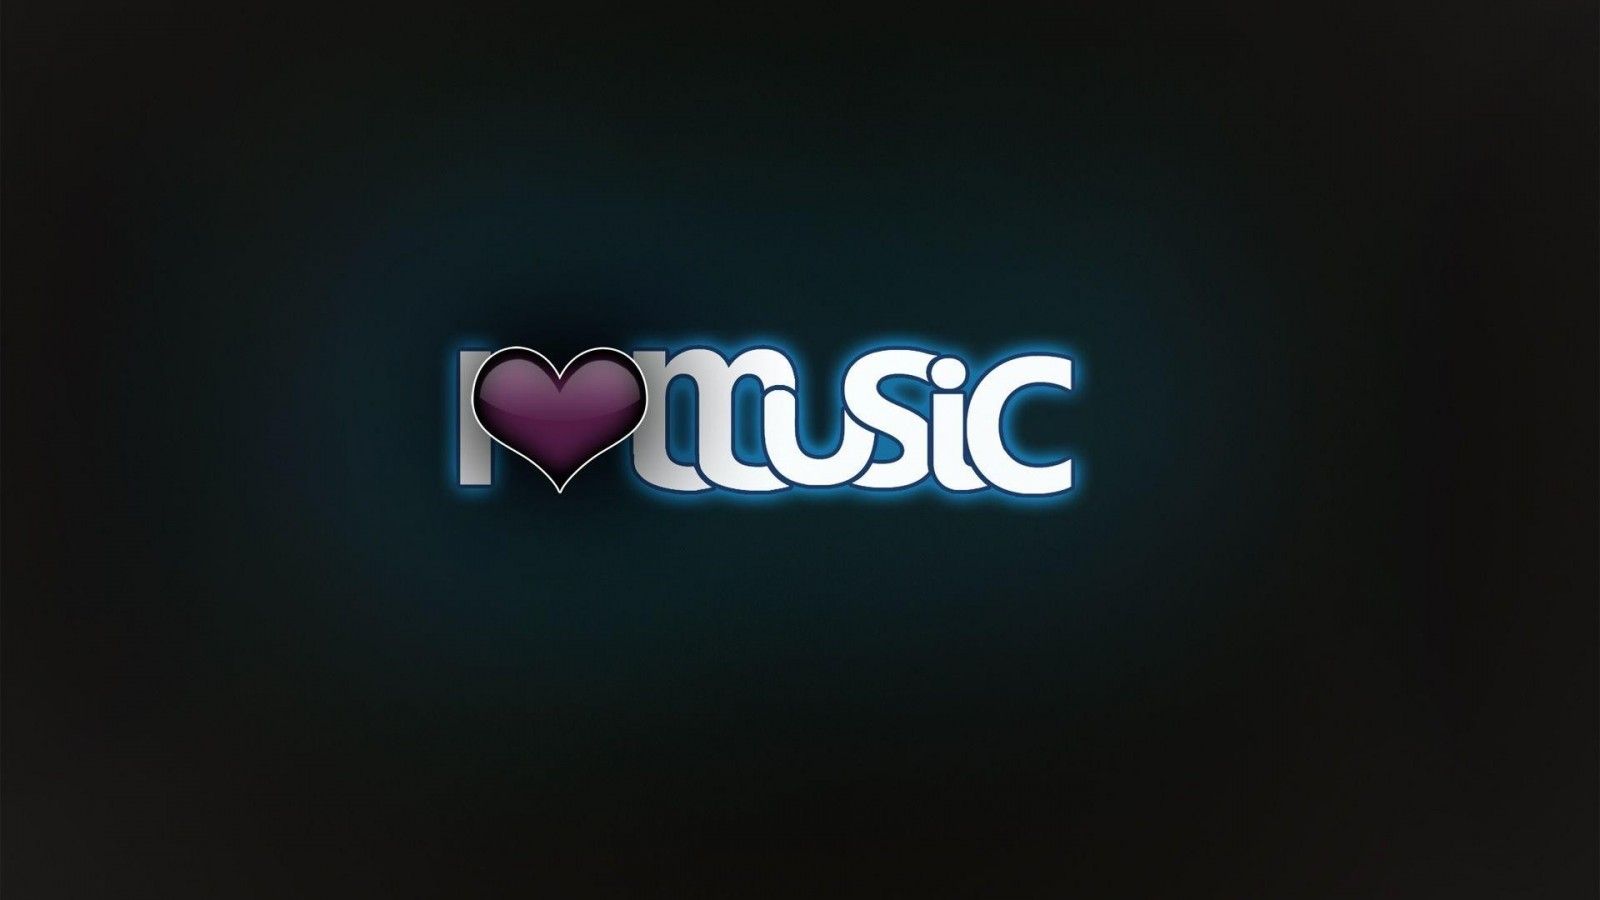 house music HD wallpaper, Background